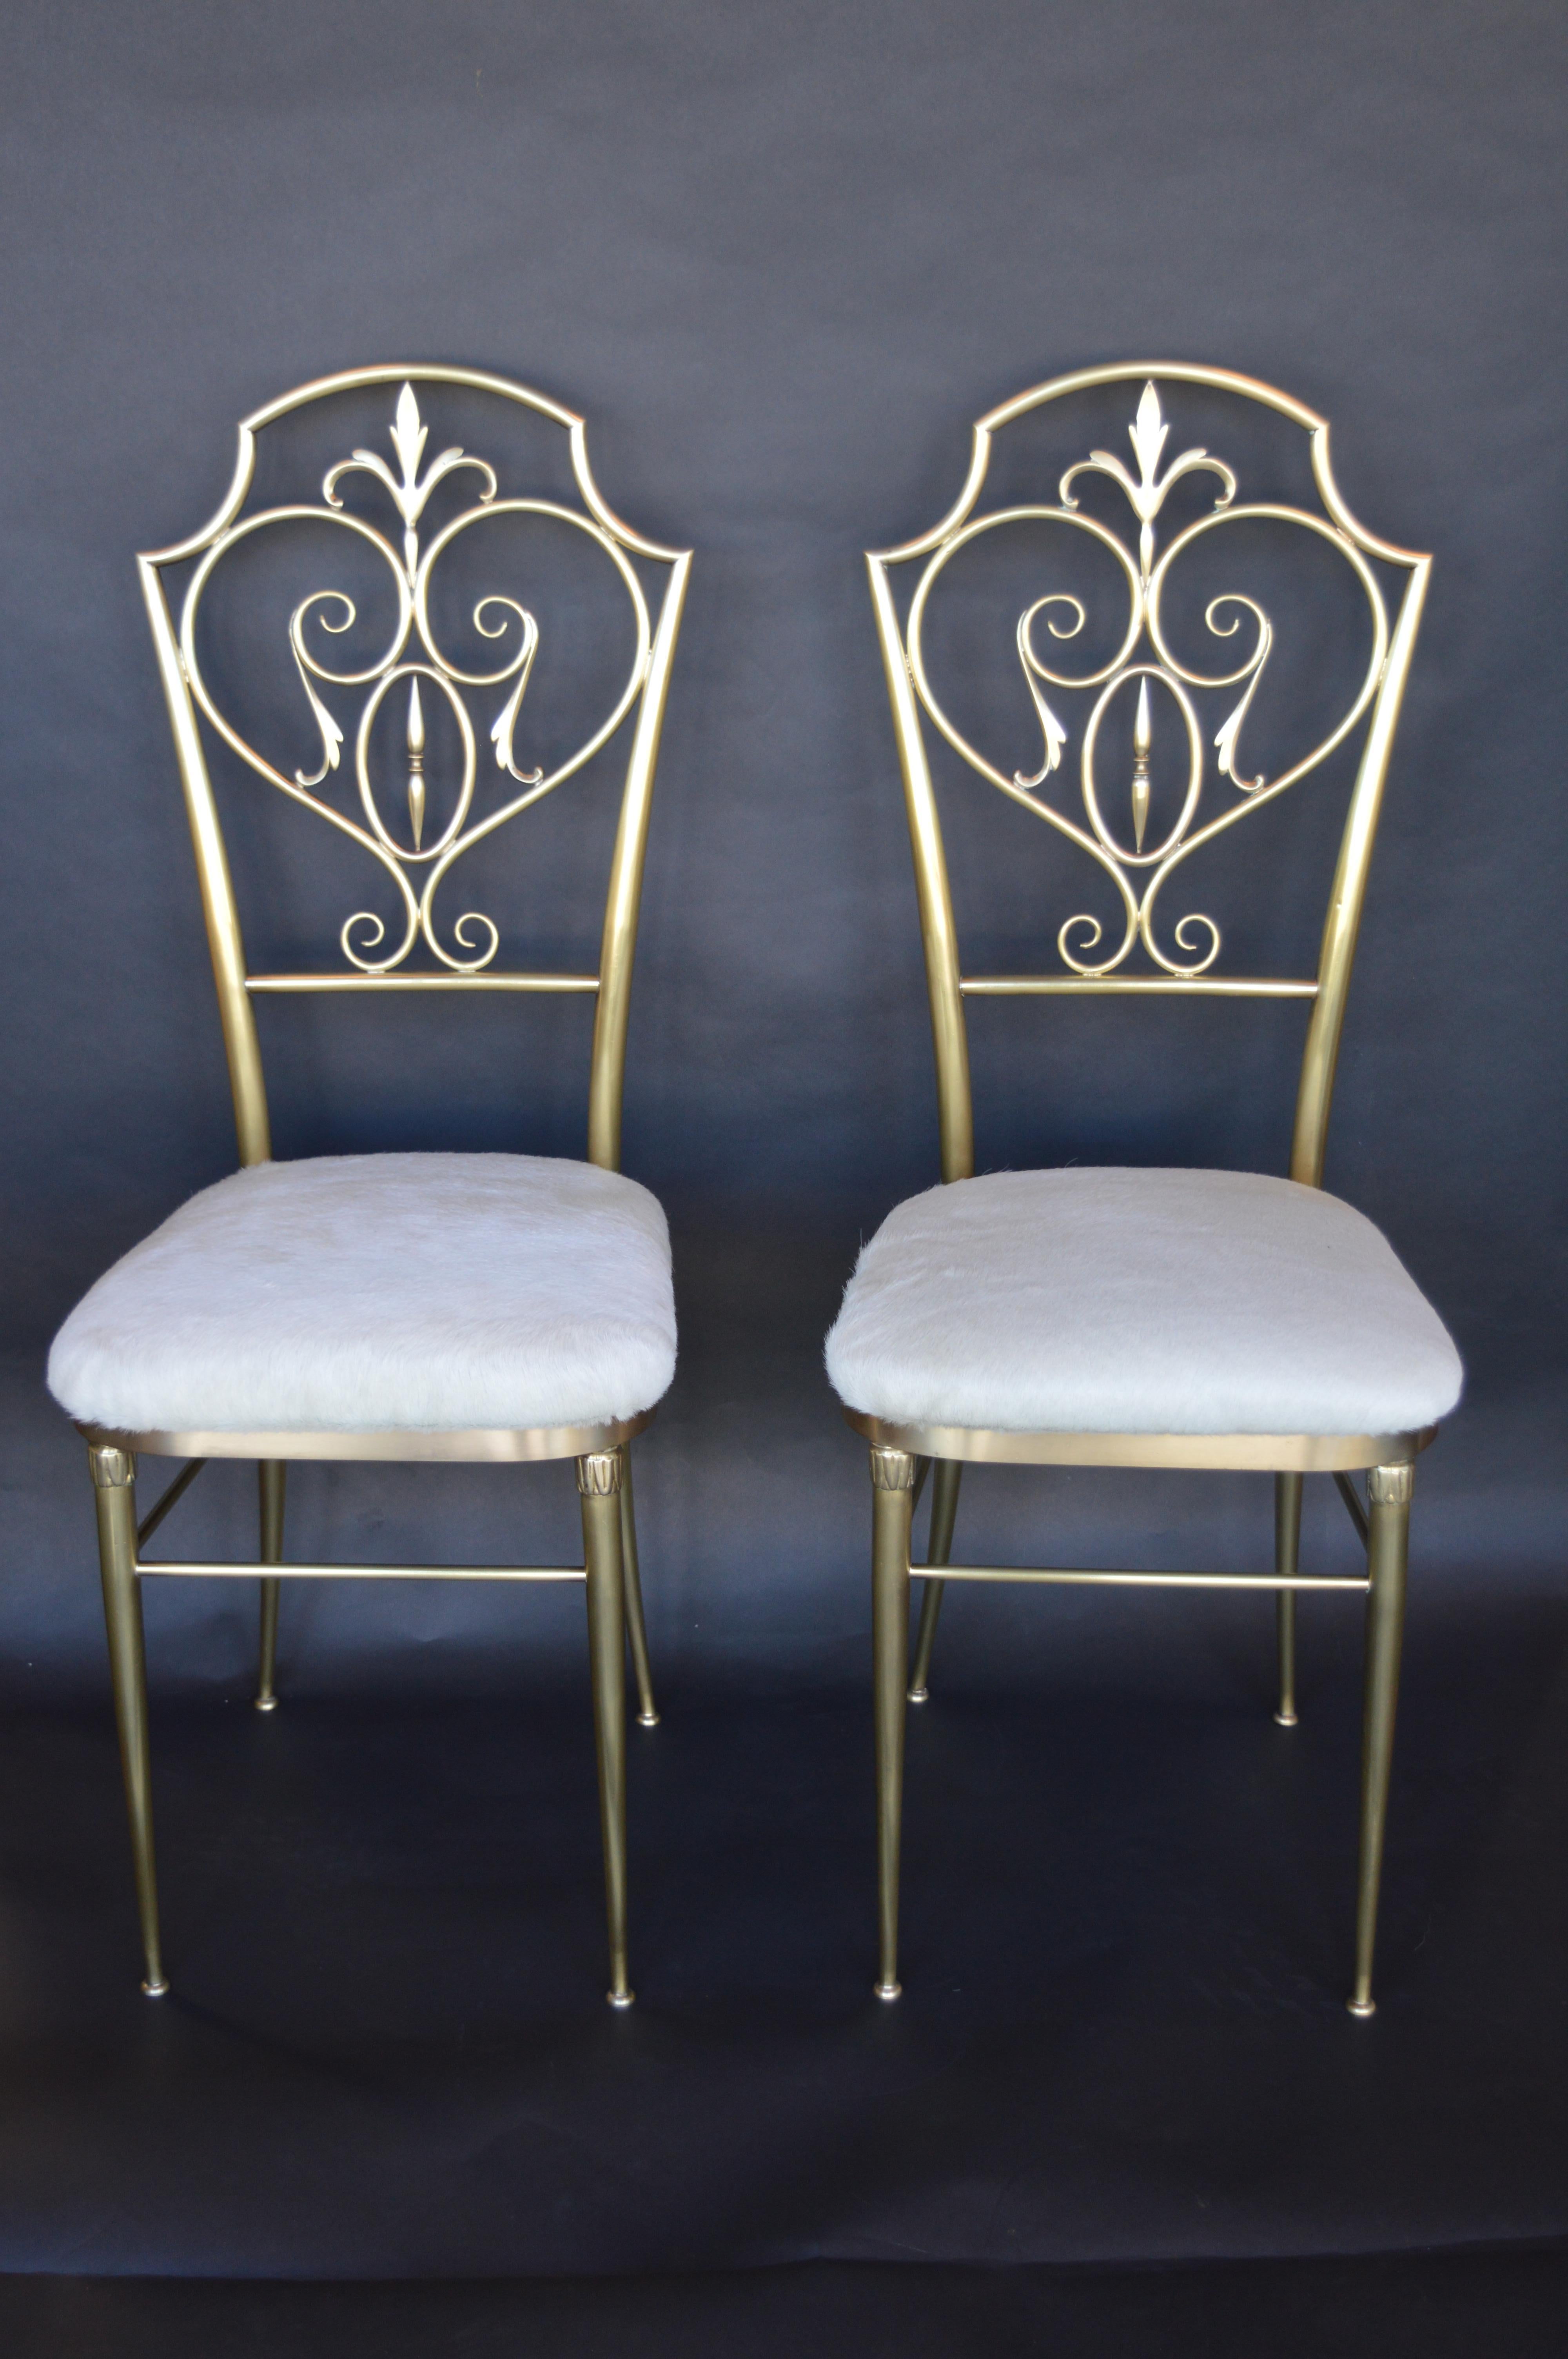 Pair of Chiavari brass chairs with white cow hide seats.